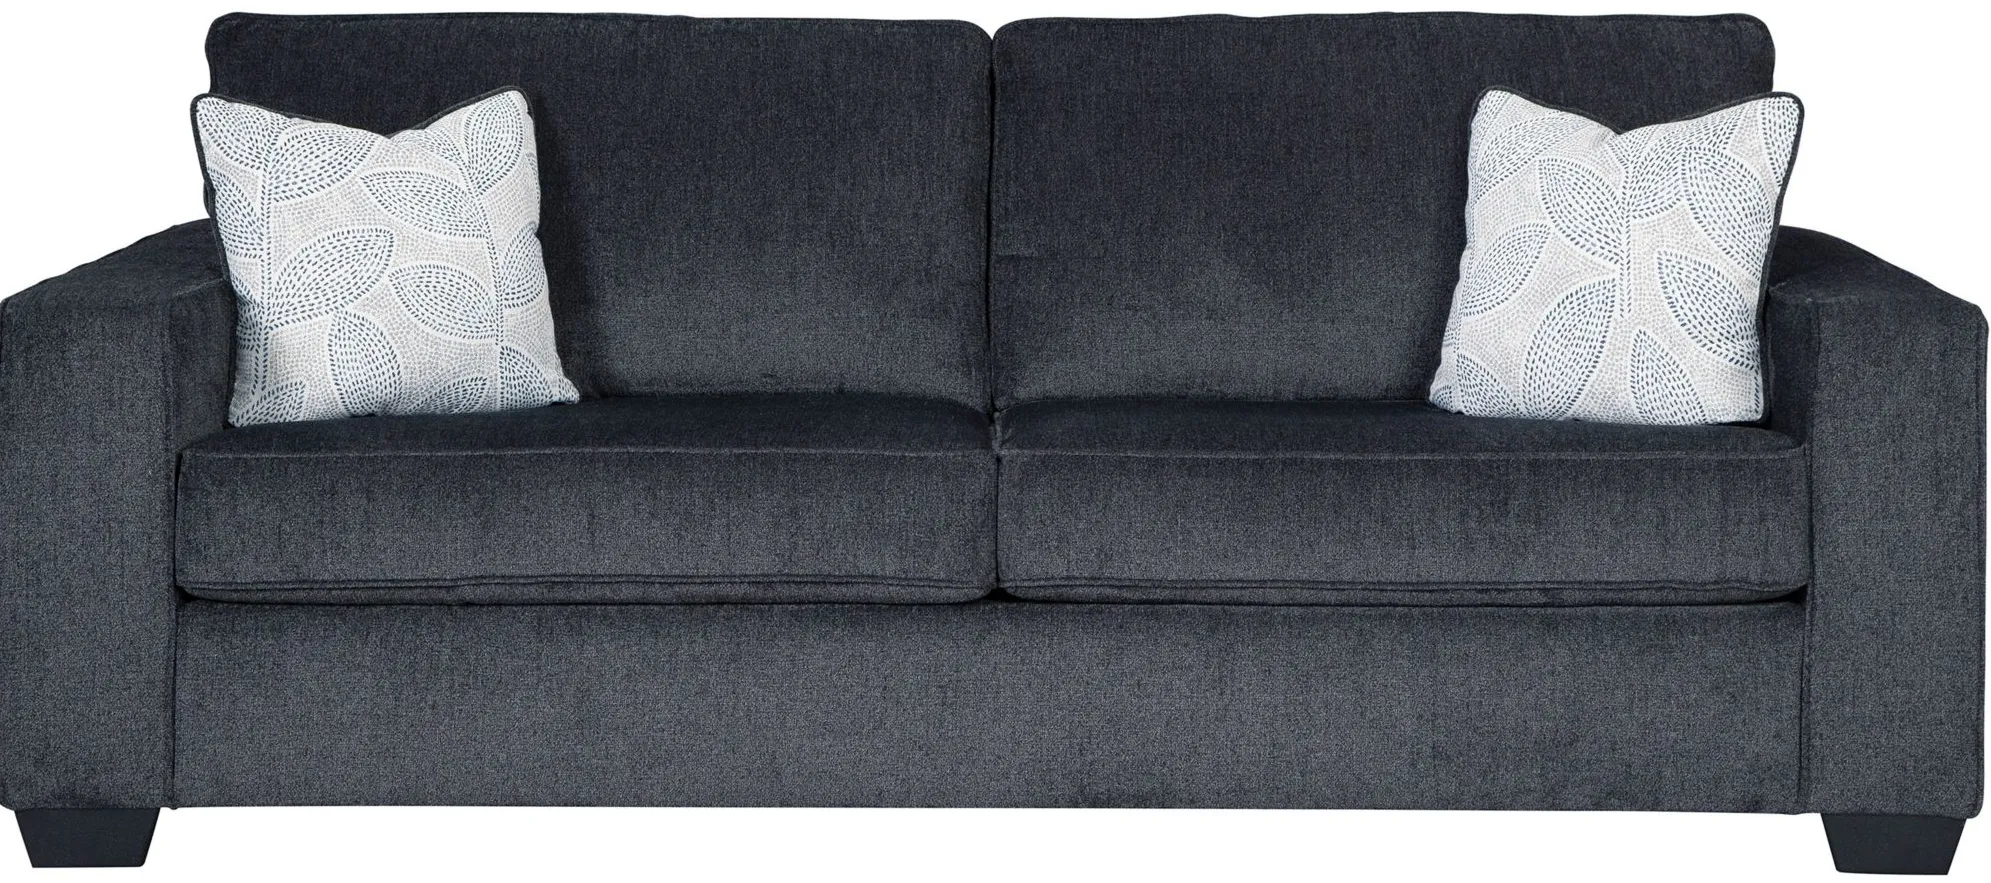 Adelson Chenille Sofa in Slate Gray by Ashley Furniture